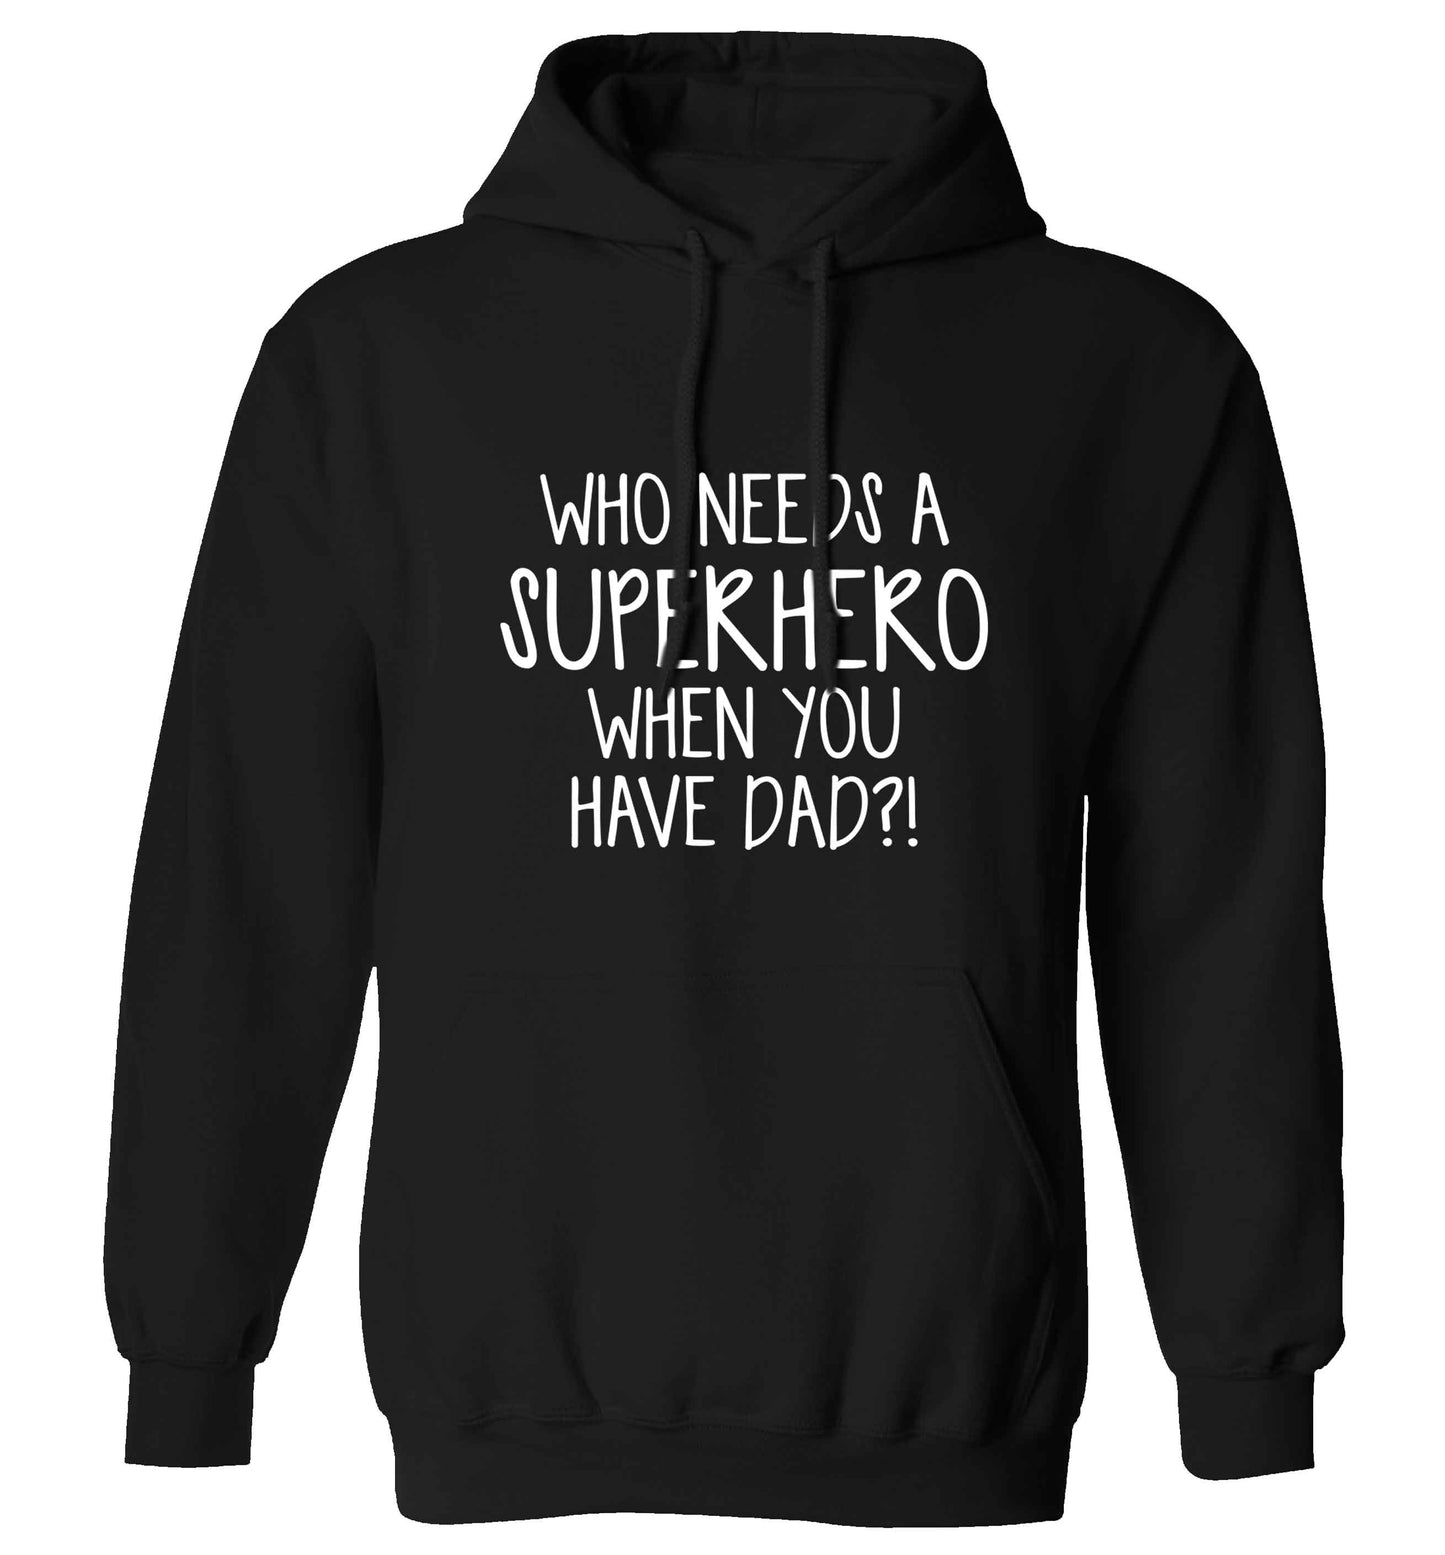 Who needs a superhero when you have dad! adults unisex black hoodie 2XL